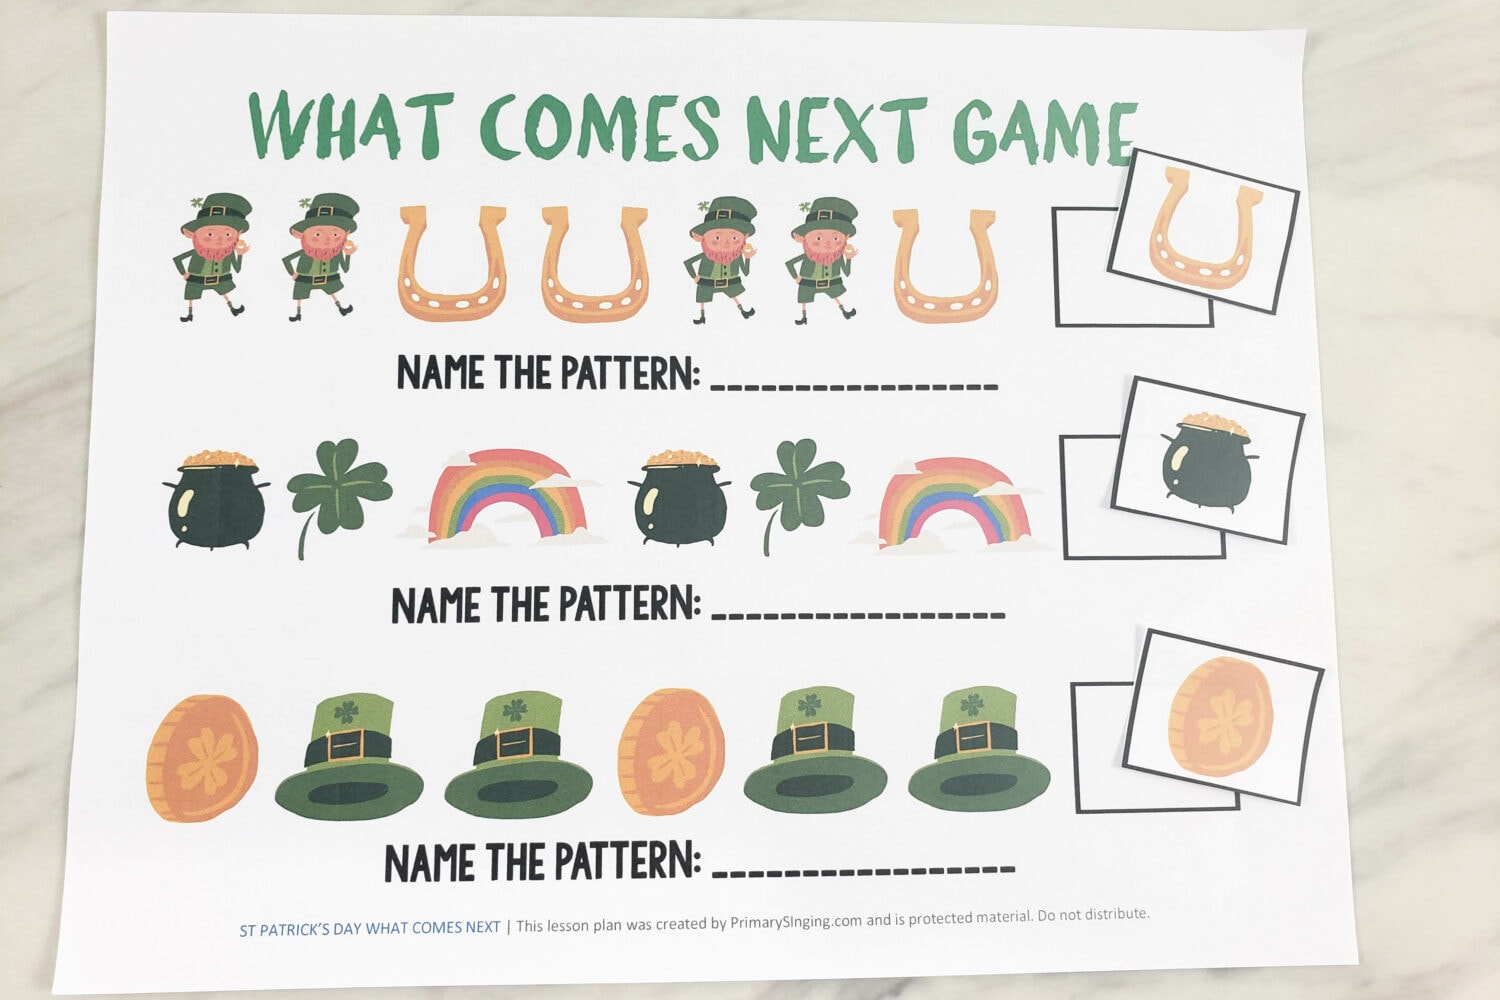 St Patrick's Day What Comes Next Sequence Game